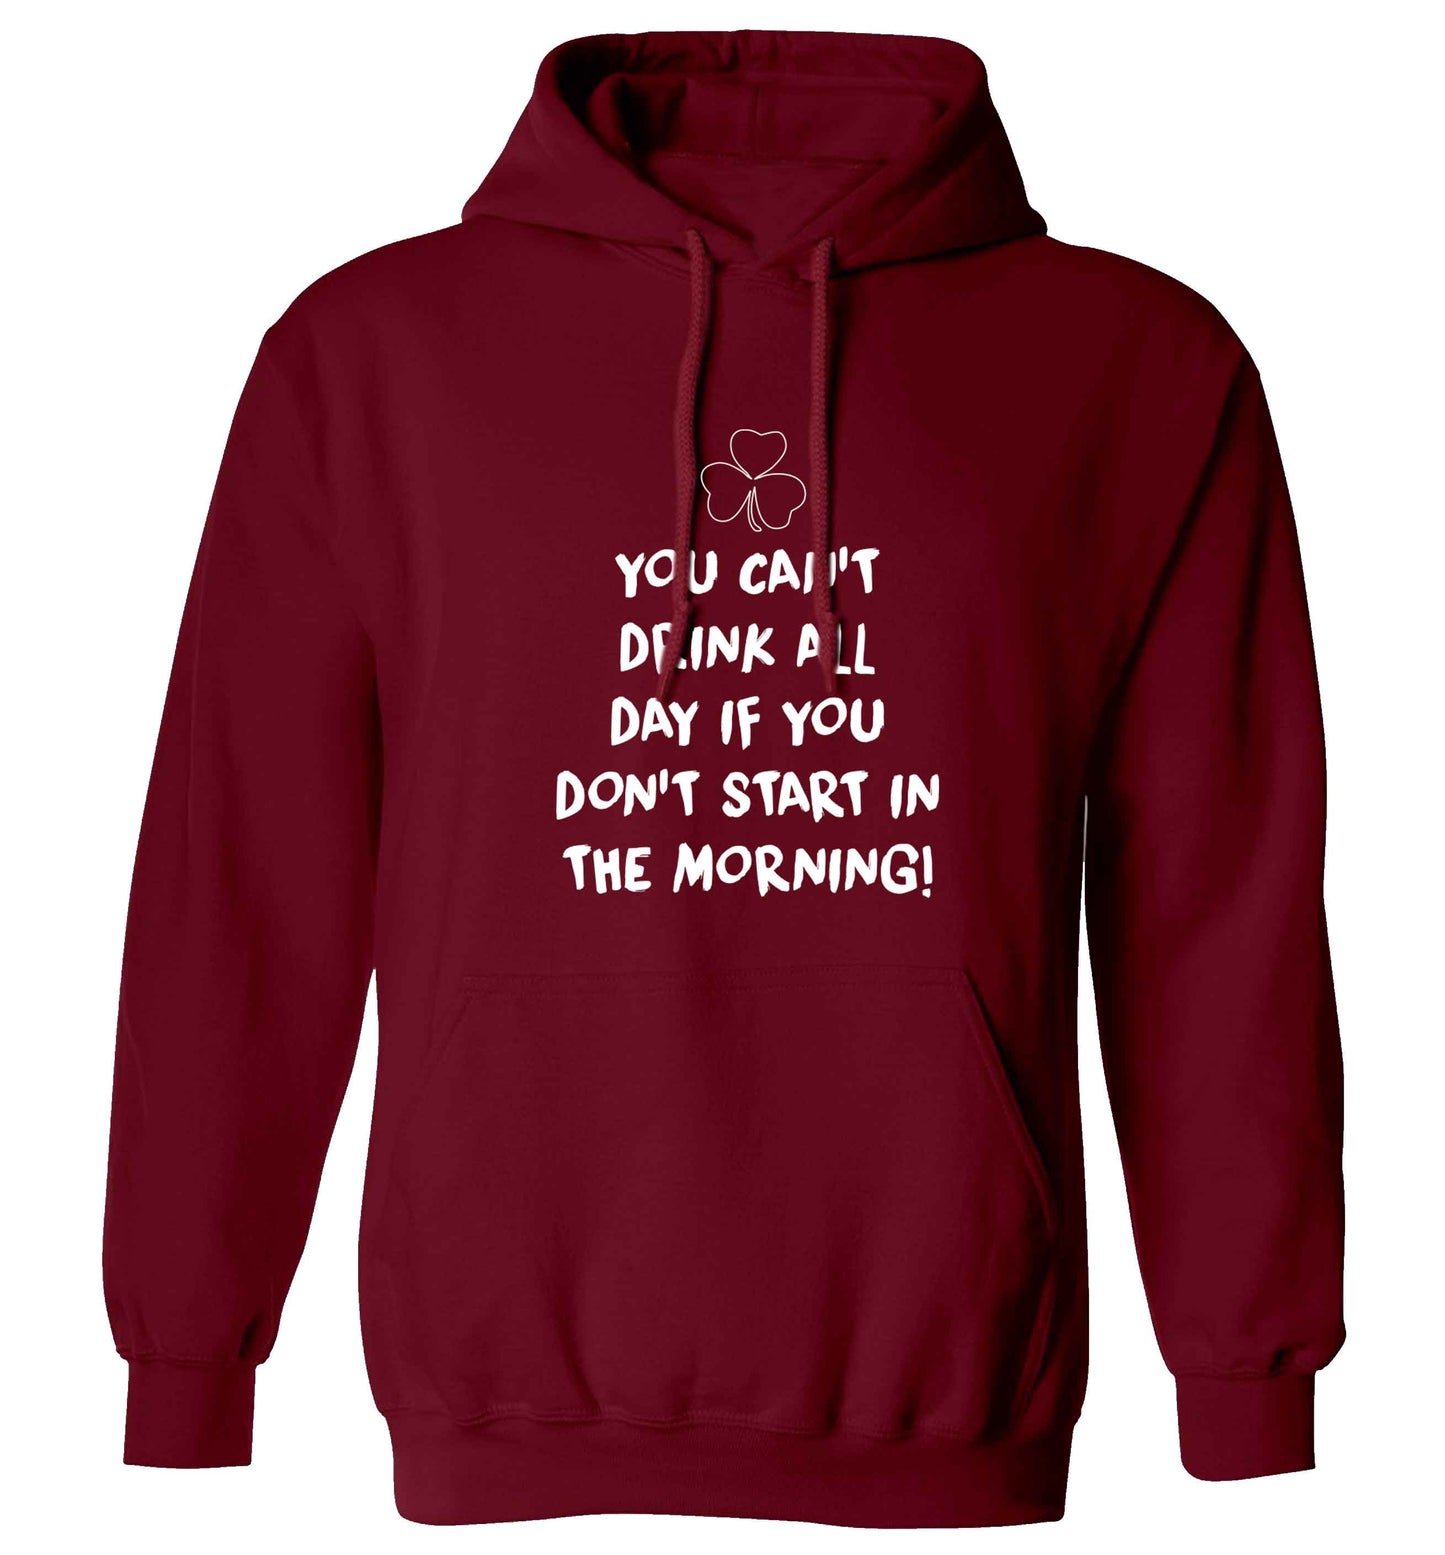 You can't drink all day if you don't start in the morning adults unisex maroon hoodie 2XL